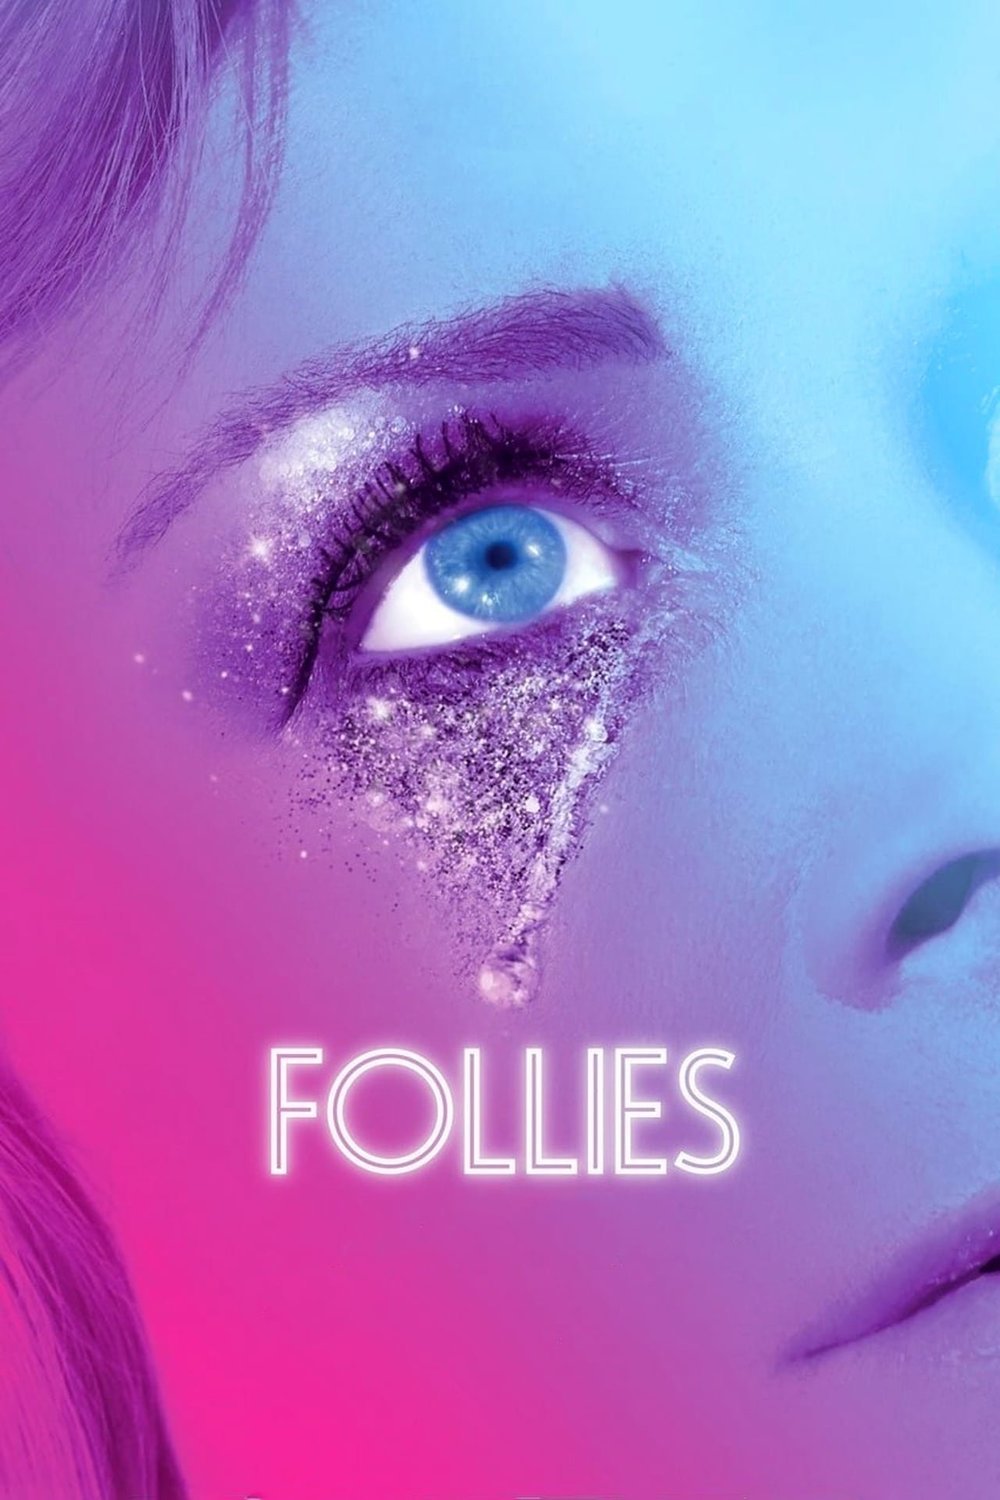 Poster of the movie National Theatre Live: Follies